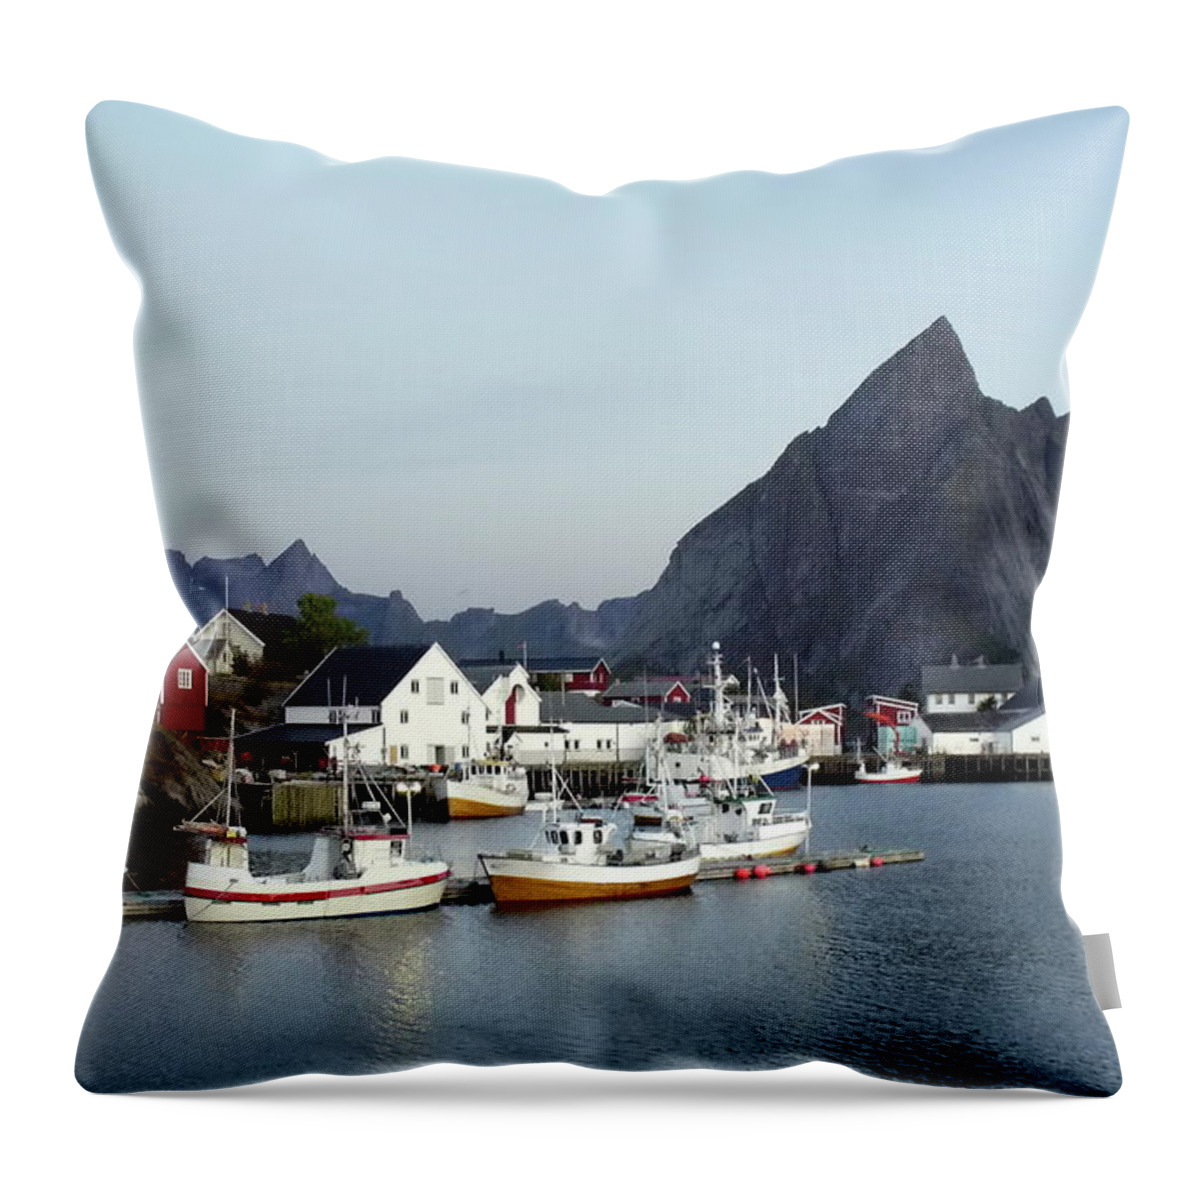 Tranquility Throw Pillow featuring the photograph Polar Sunrise In Lofoten Islands by (noou) - Stefano Papetti